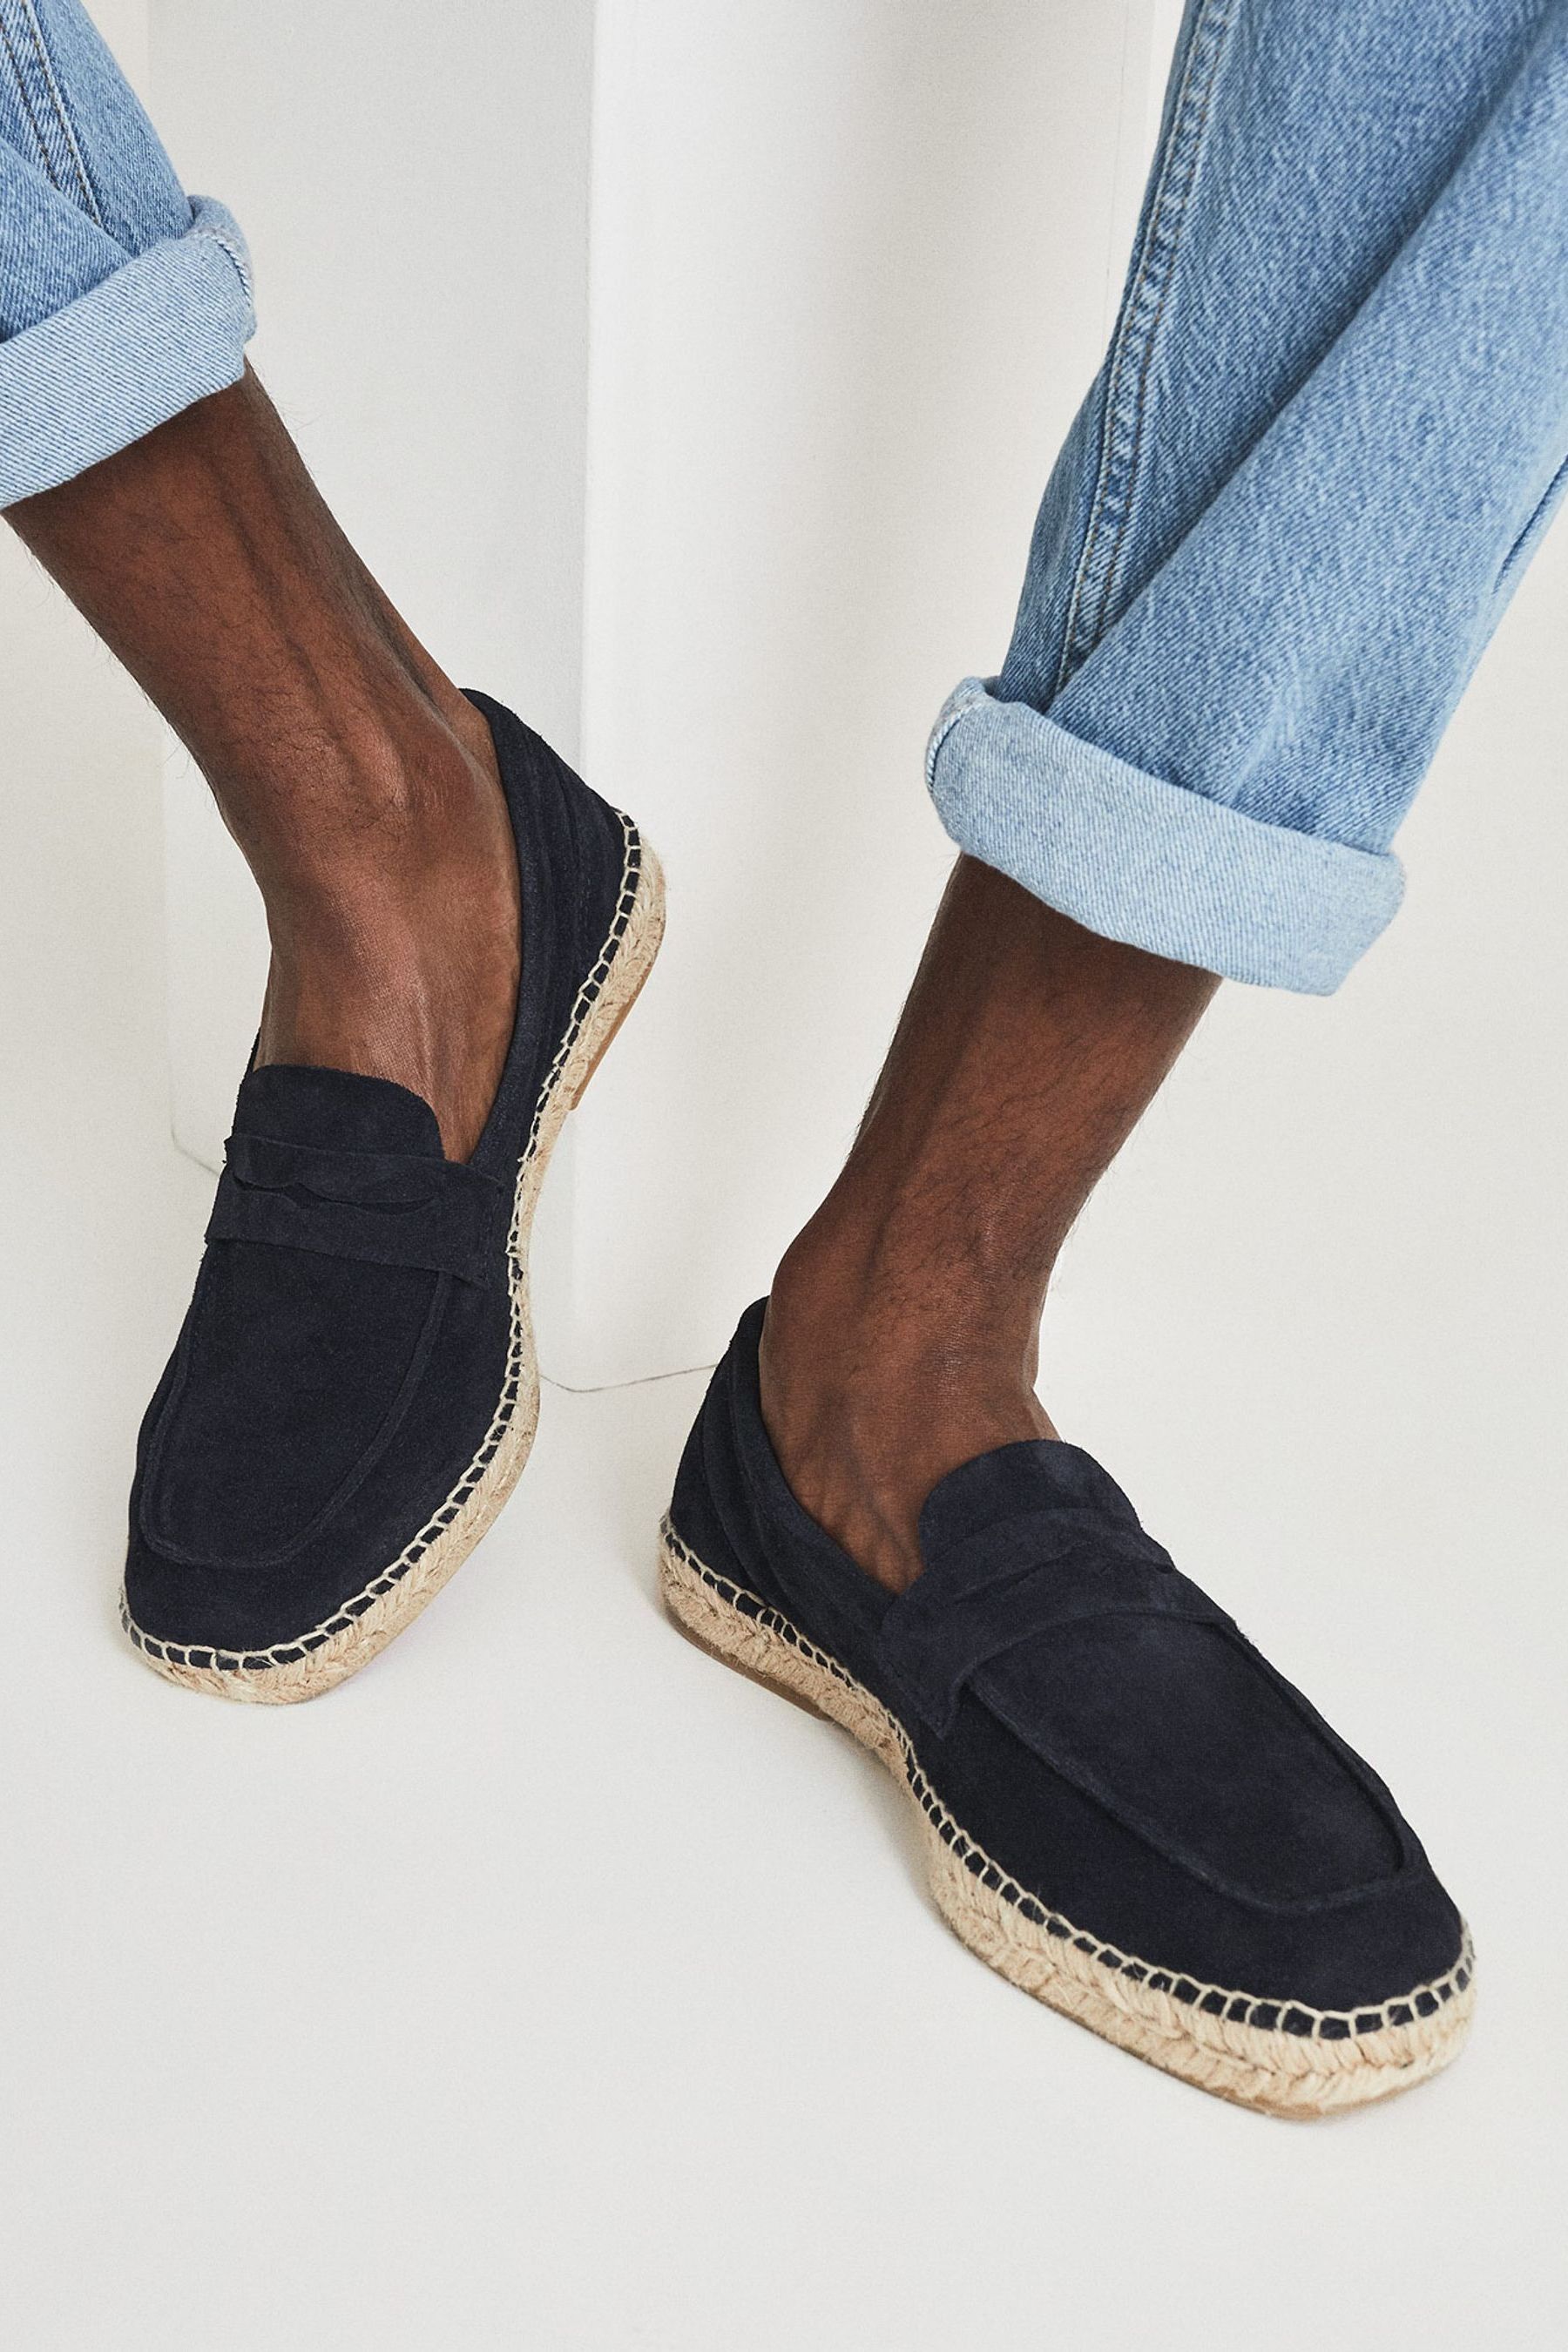 Buy Reiss Suede Espadrilles from the Next UK online shop